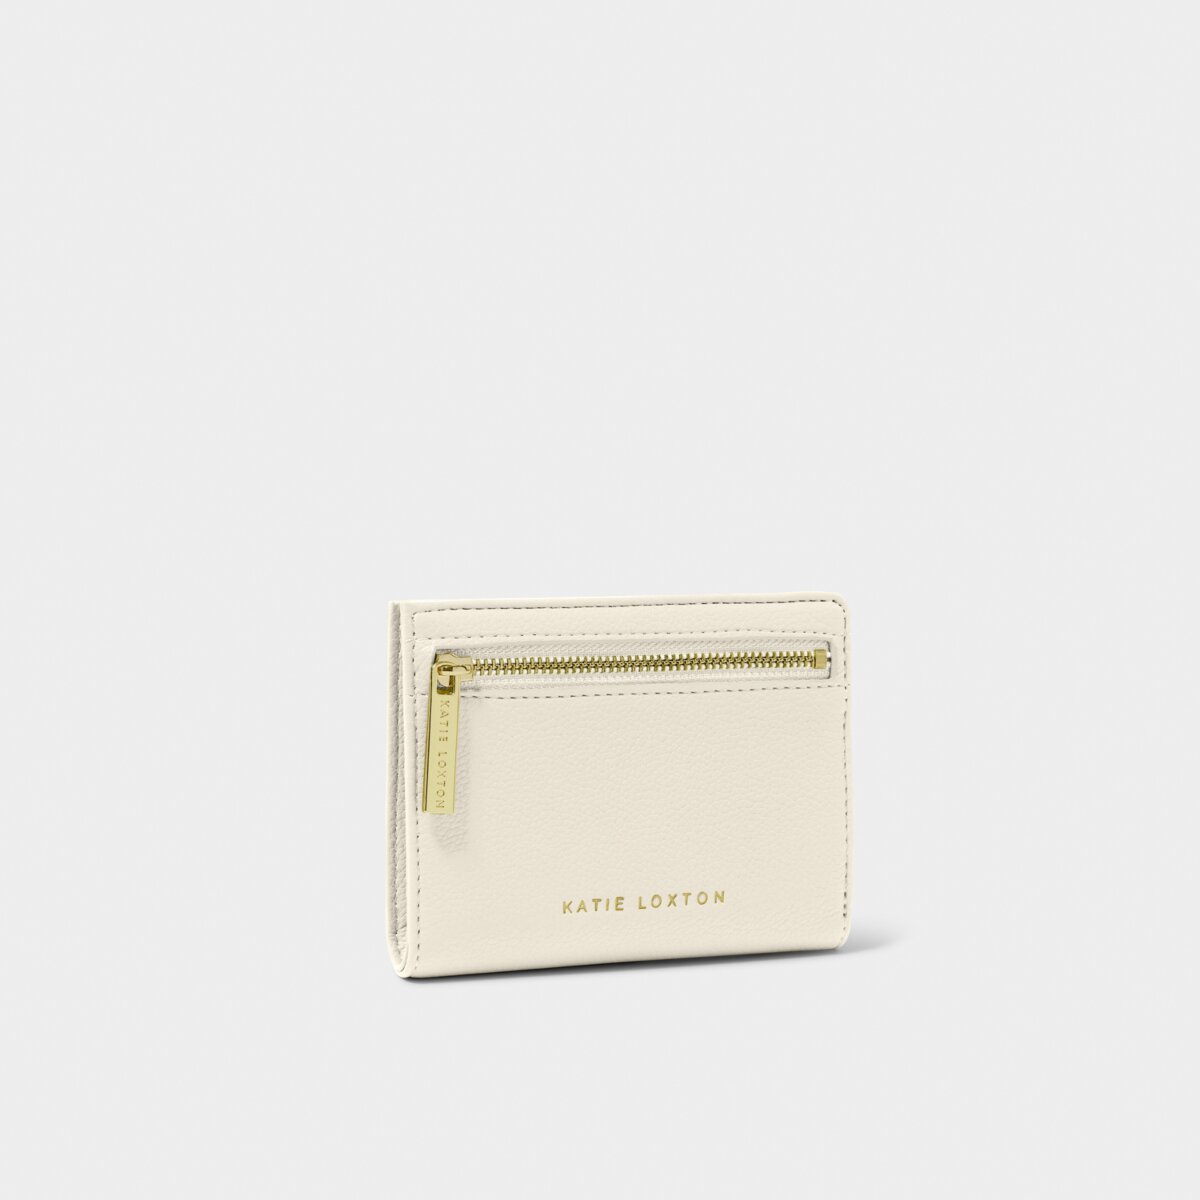 small rectangular purse with a gold zipper. The purse has Katie Loxton in gold foil printed near the bottom edge.